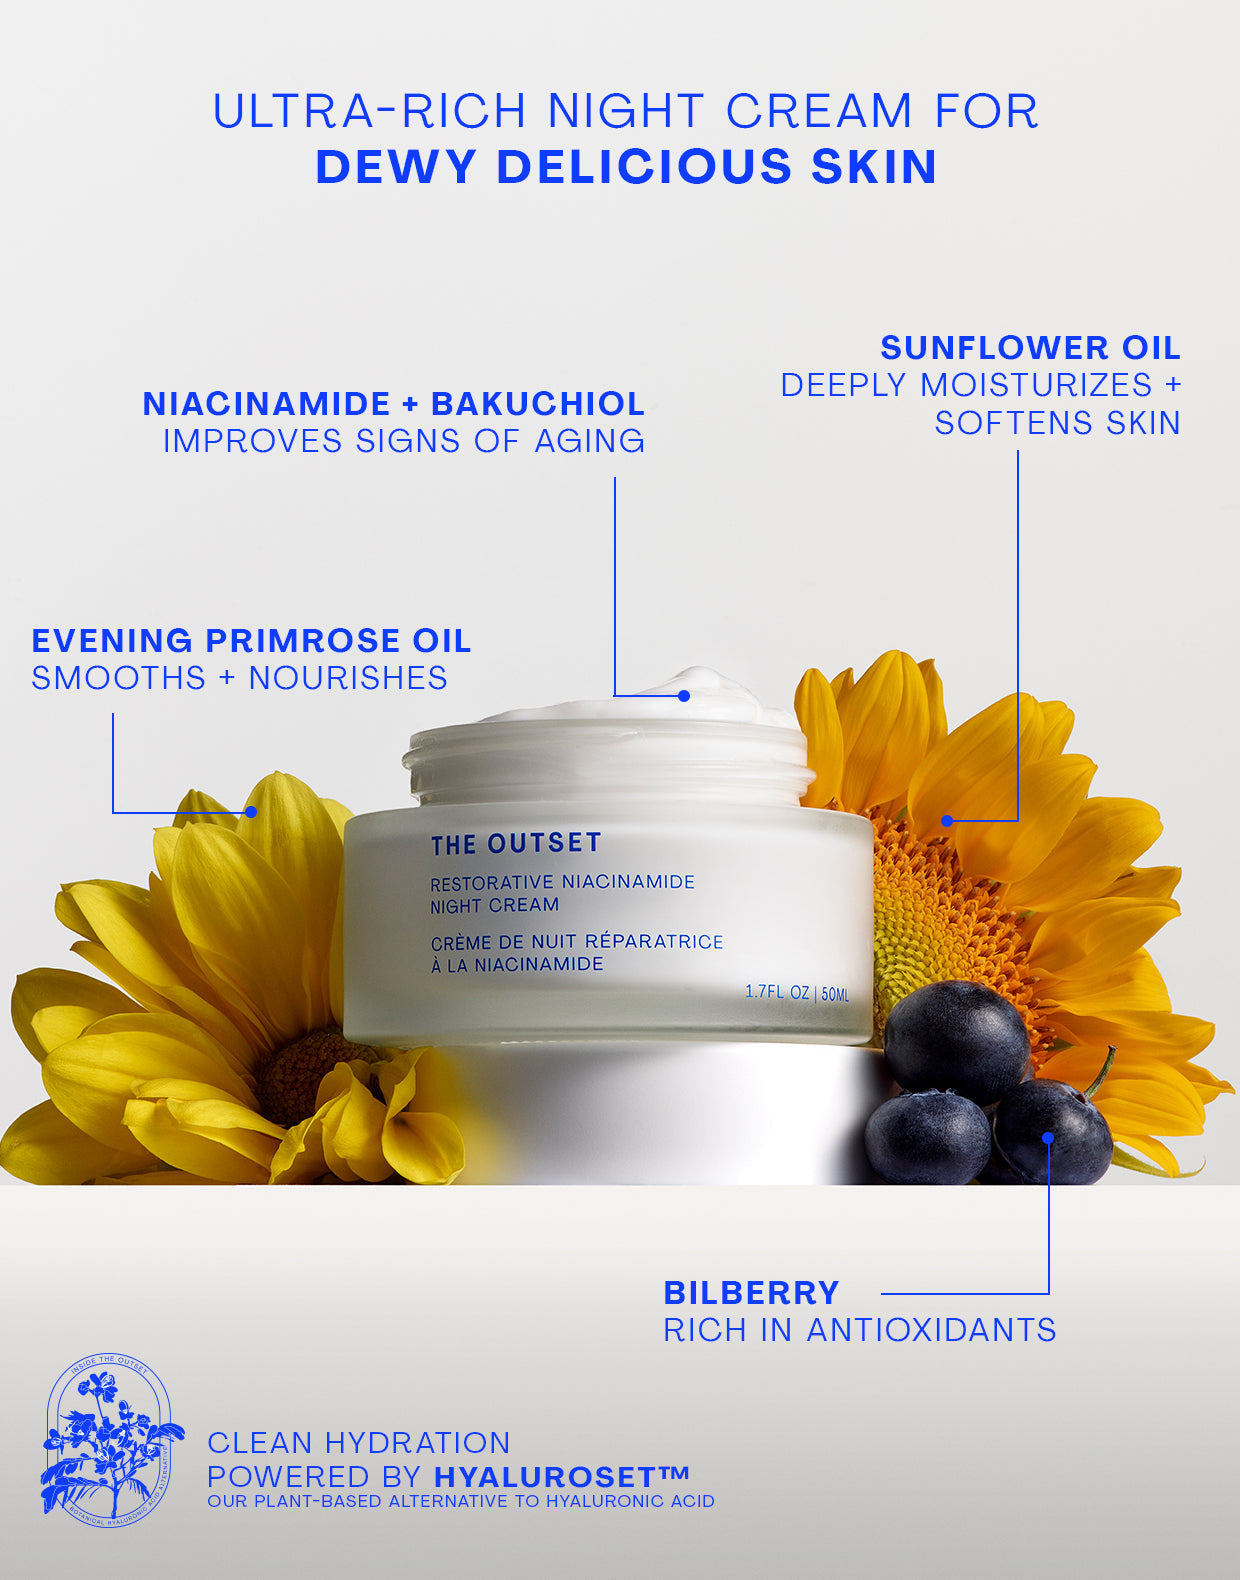 Photo of The Outset night cream with ingredients; Ultra-rich night cream for dewy delicious skin; niacinamide + bakuchiol improves signs of aging; sunflower oil deeply moisturizes + softens skin; evening primrose oil smooths + nourishes; bilberry rich in antioxidants hyaluroset badge with text clean hydration powered by hyaluroset (TM), our plant-based alternative to hyaluronic acid